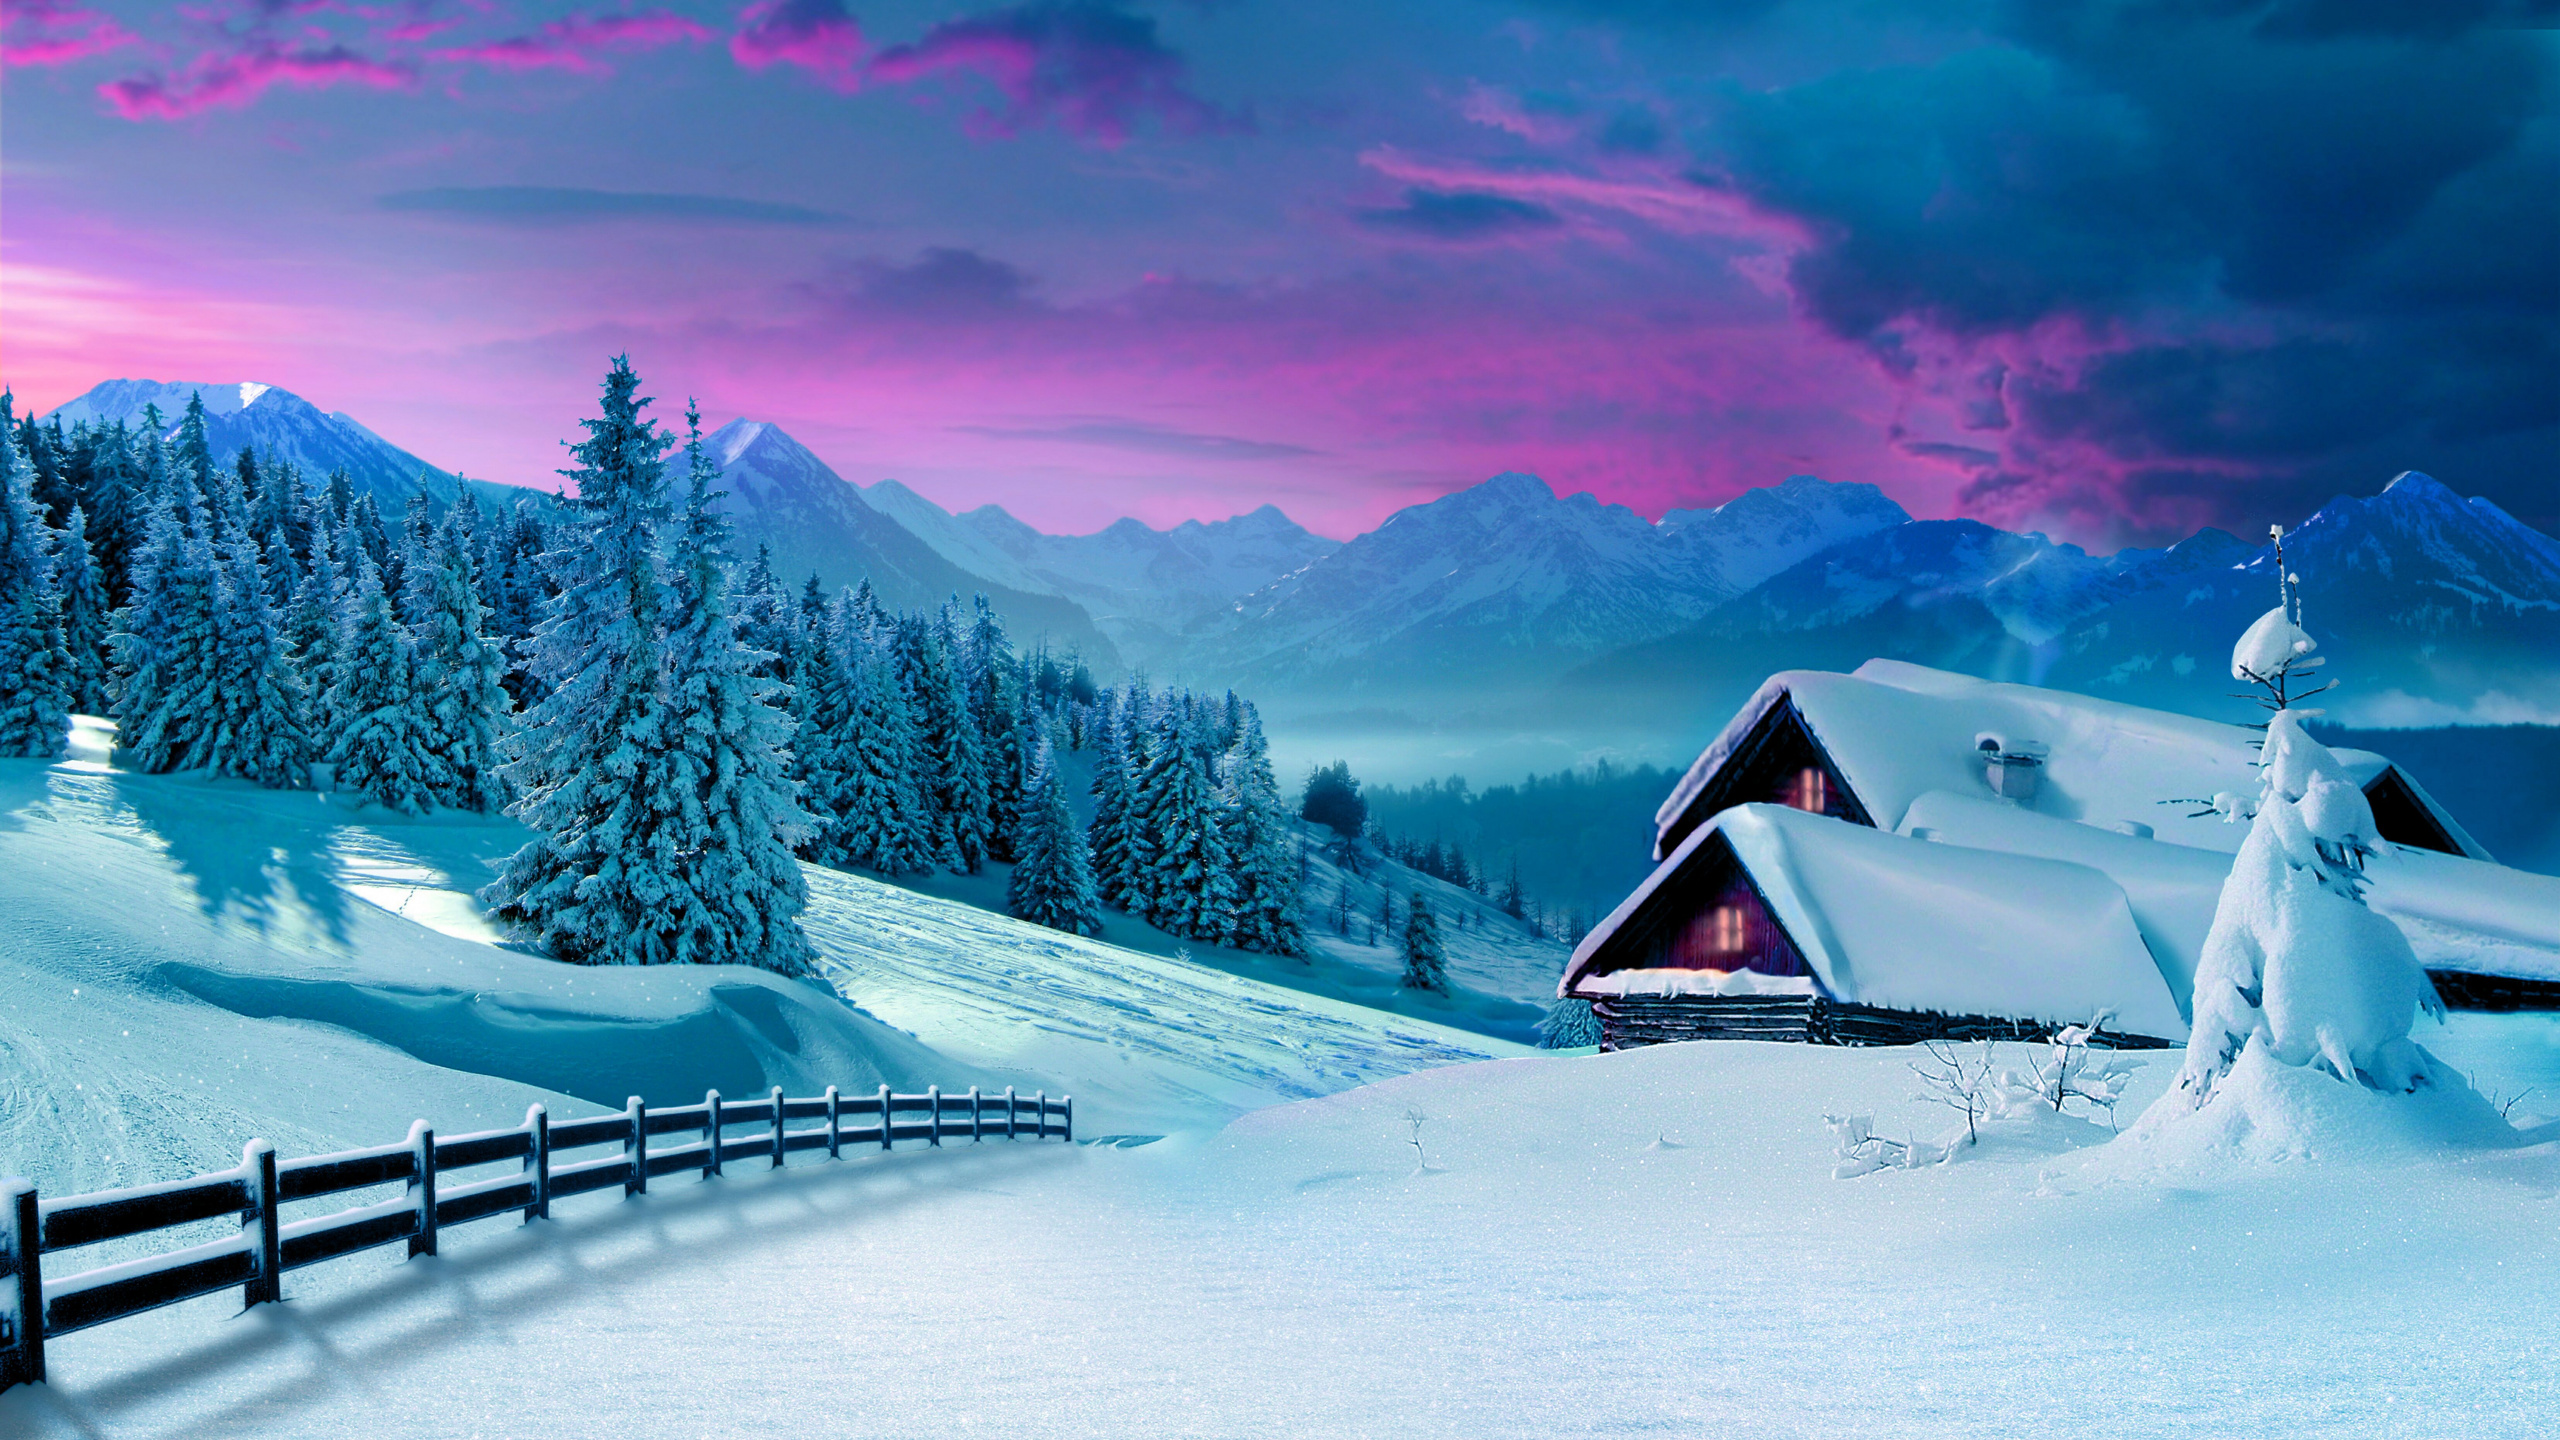 Brown Wooden House on Snow Covered Ground Near Trees and Mountains During Daytime. Wallpaper in 2560x1440 Resolution